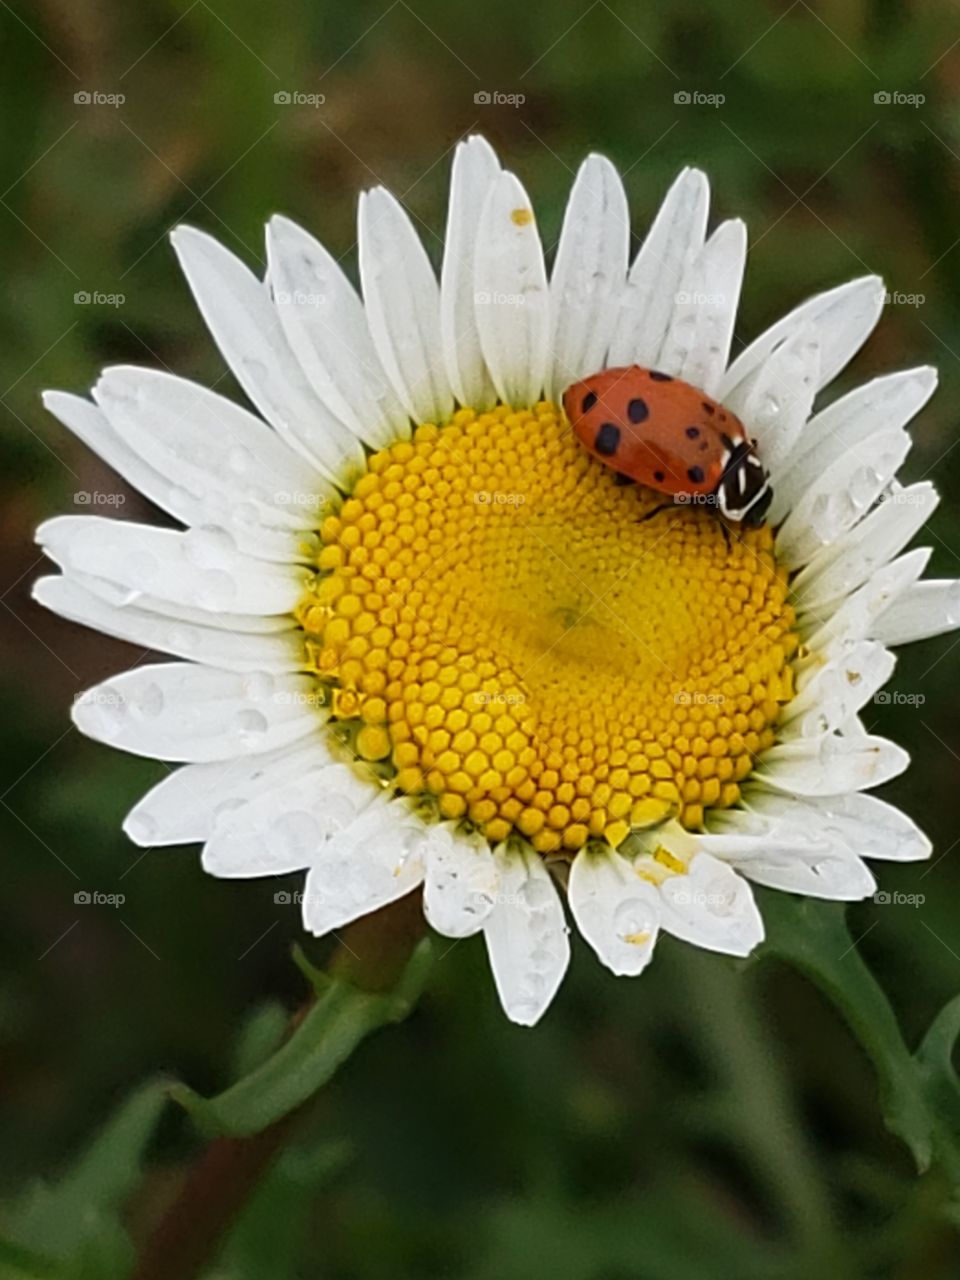 Japanese beetle resting on a few covered daisy